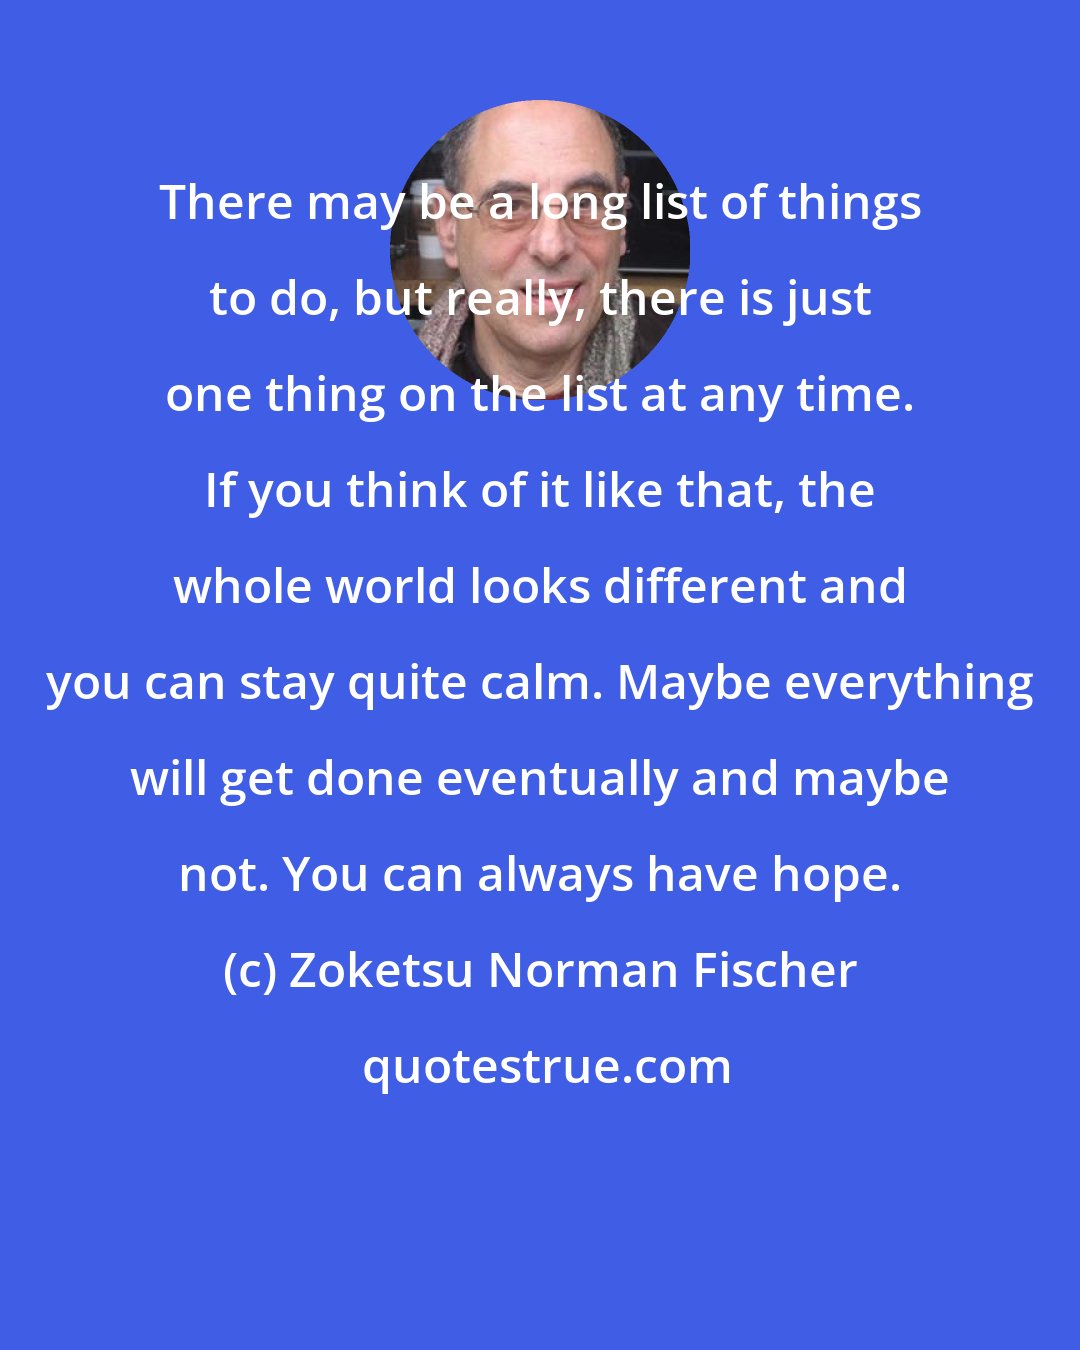 Zoketsu Norman Fischer: There may be a long list of things to do, but really, there is just one thing on the list at any time. If you think of it like that, the whole world looks different and you can stay quite calm. Maybe everything will get done eventually and maybe not. You can always have hope.